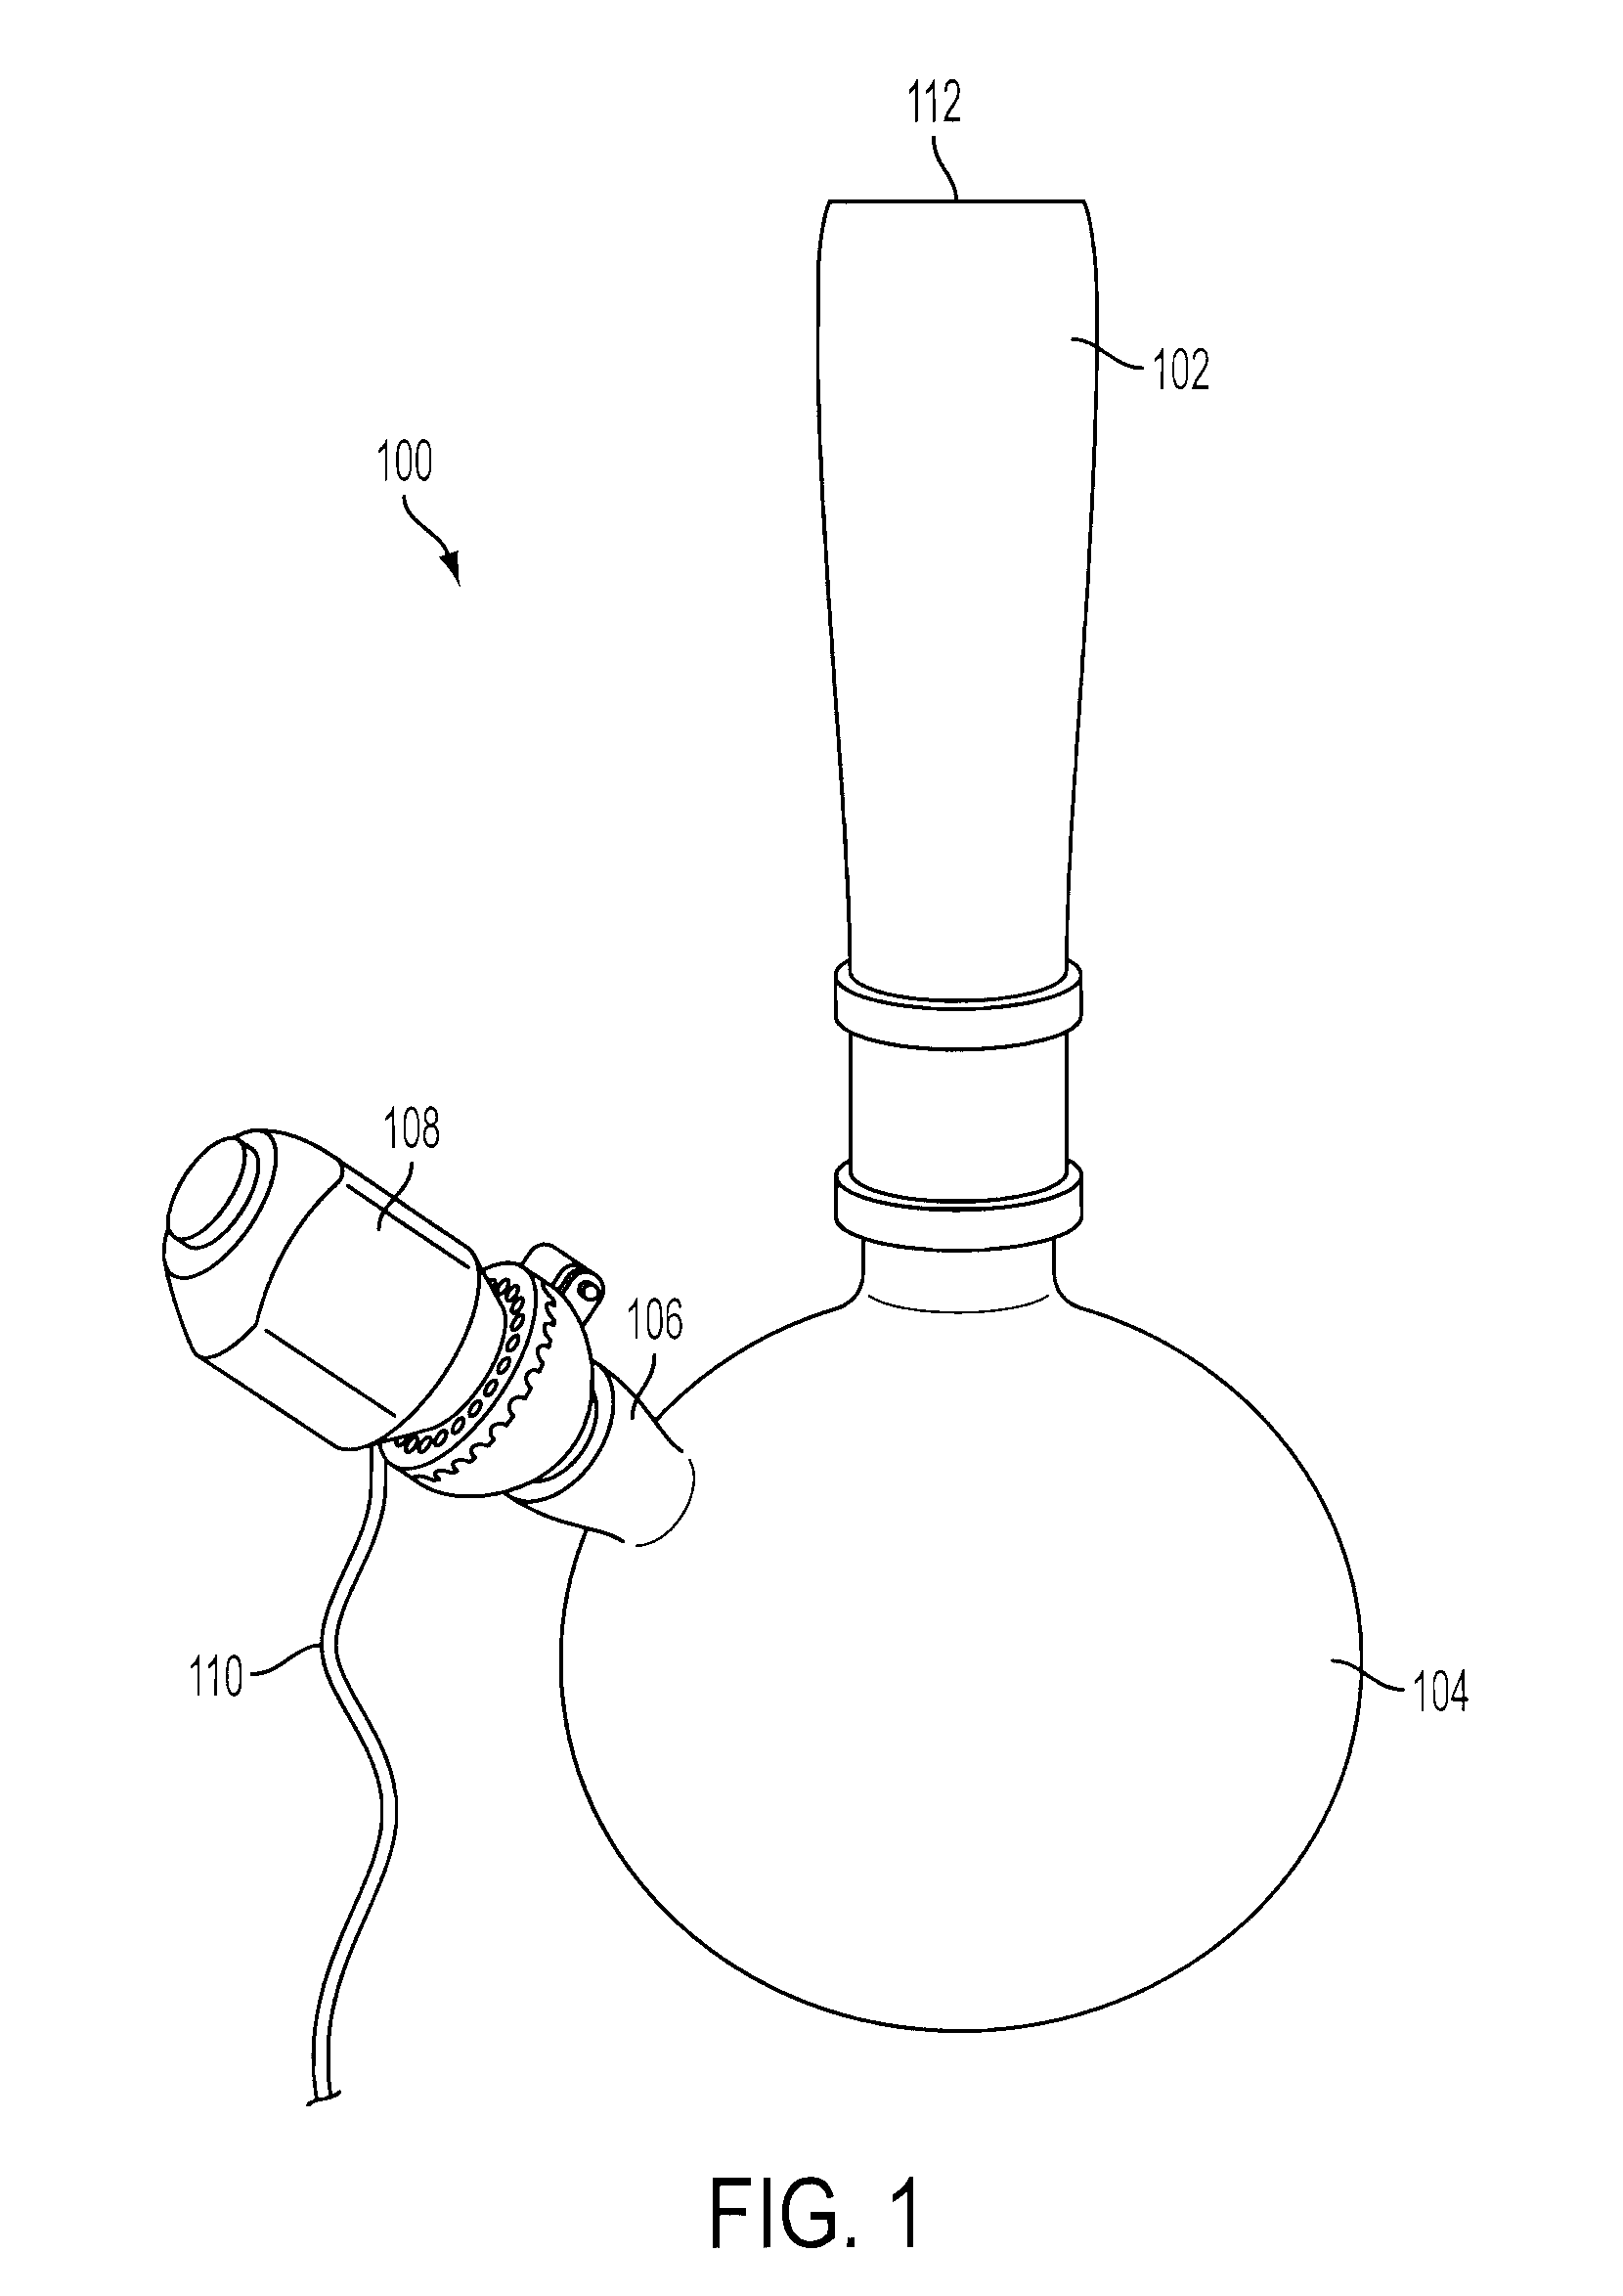 Smoking device using a laser diode as a source of ignition